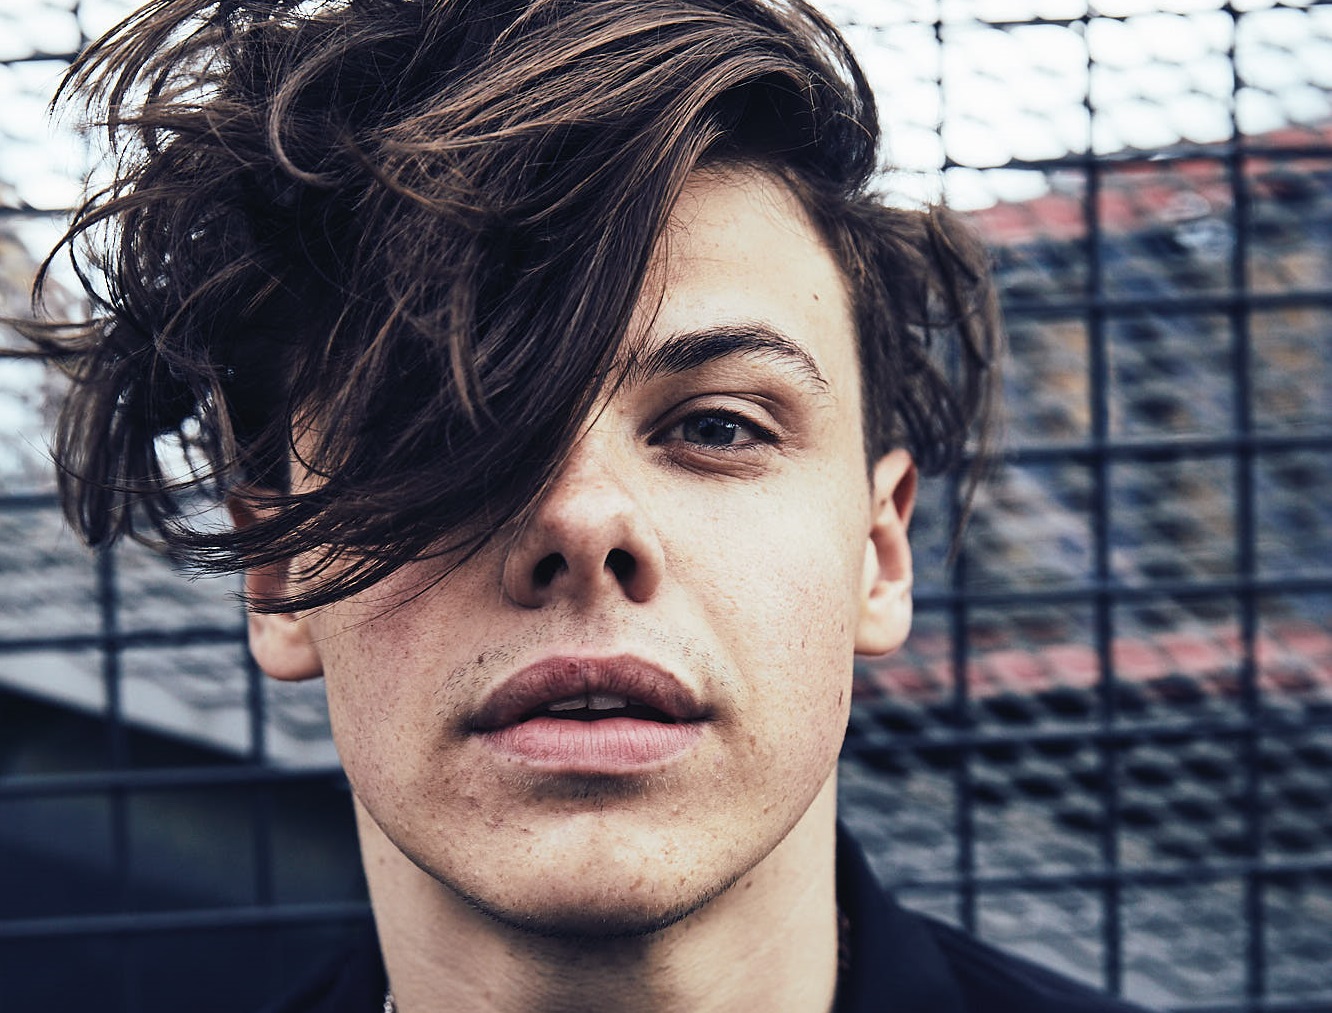 Yungblud © Andrew Whitton